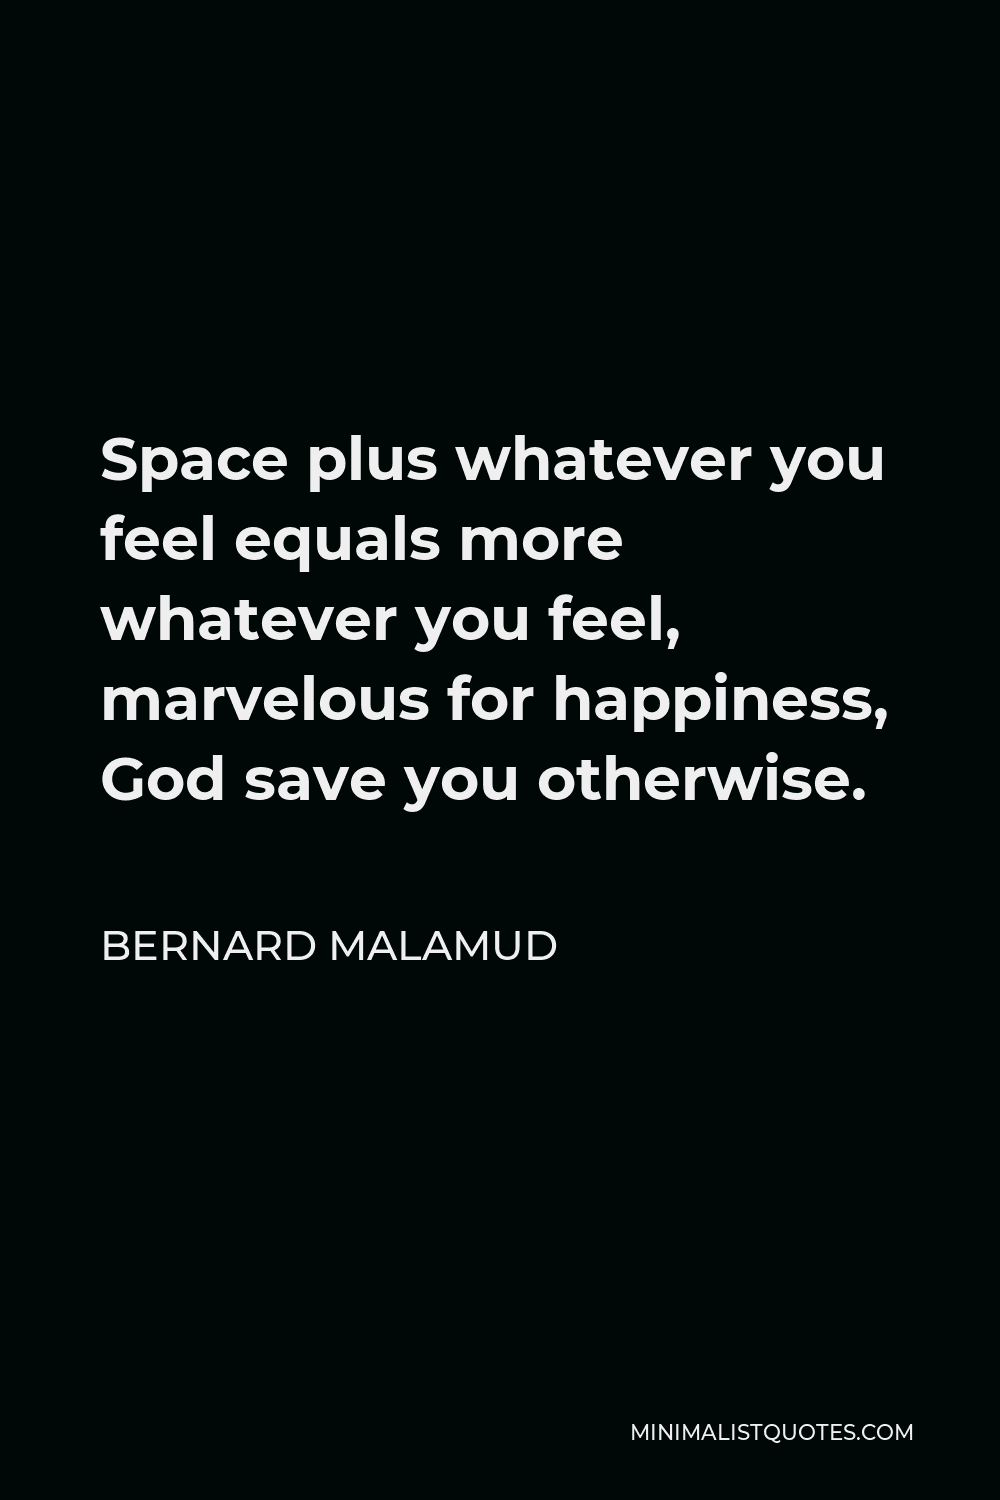 Bernard Malamud Quote - Space plus whatever you feel equals more whatever you feel, marvelous for happiness, God save you otherwise.